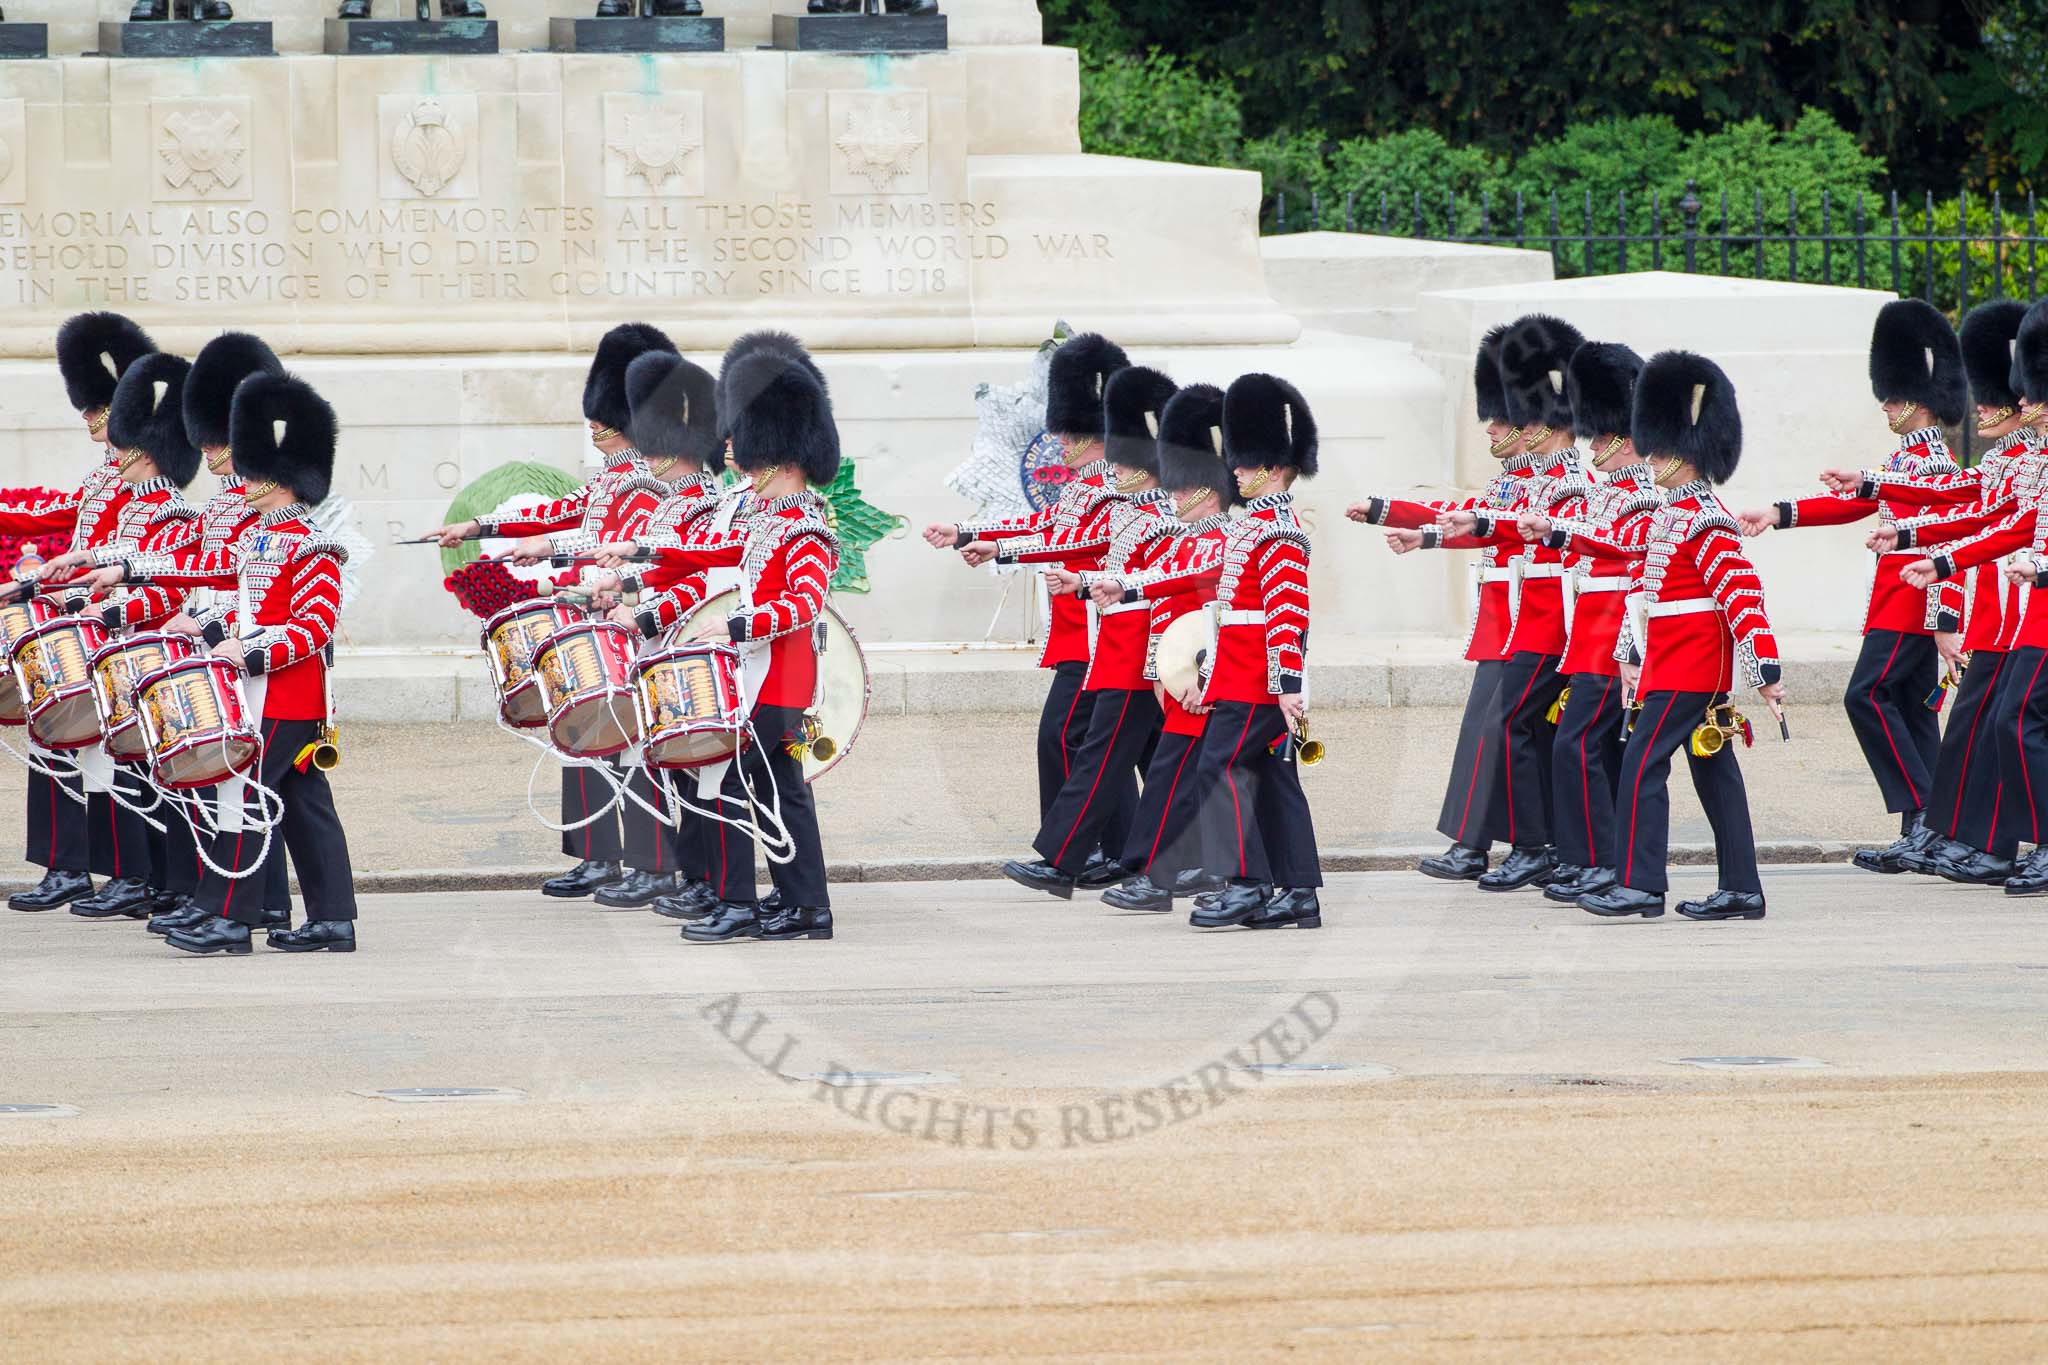 Major General's Review 2013: Musicians of the Band of the Grenadier Guards and Drummers of the Band of the Grenadier Guards..
Horse Guards Parade, Westminster,
London SW1,

United Kingdom,
on 01 June 2013 at 10:27, image #95